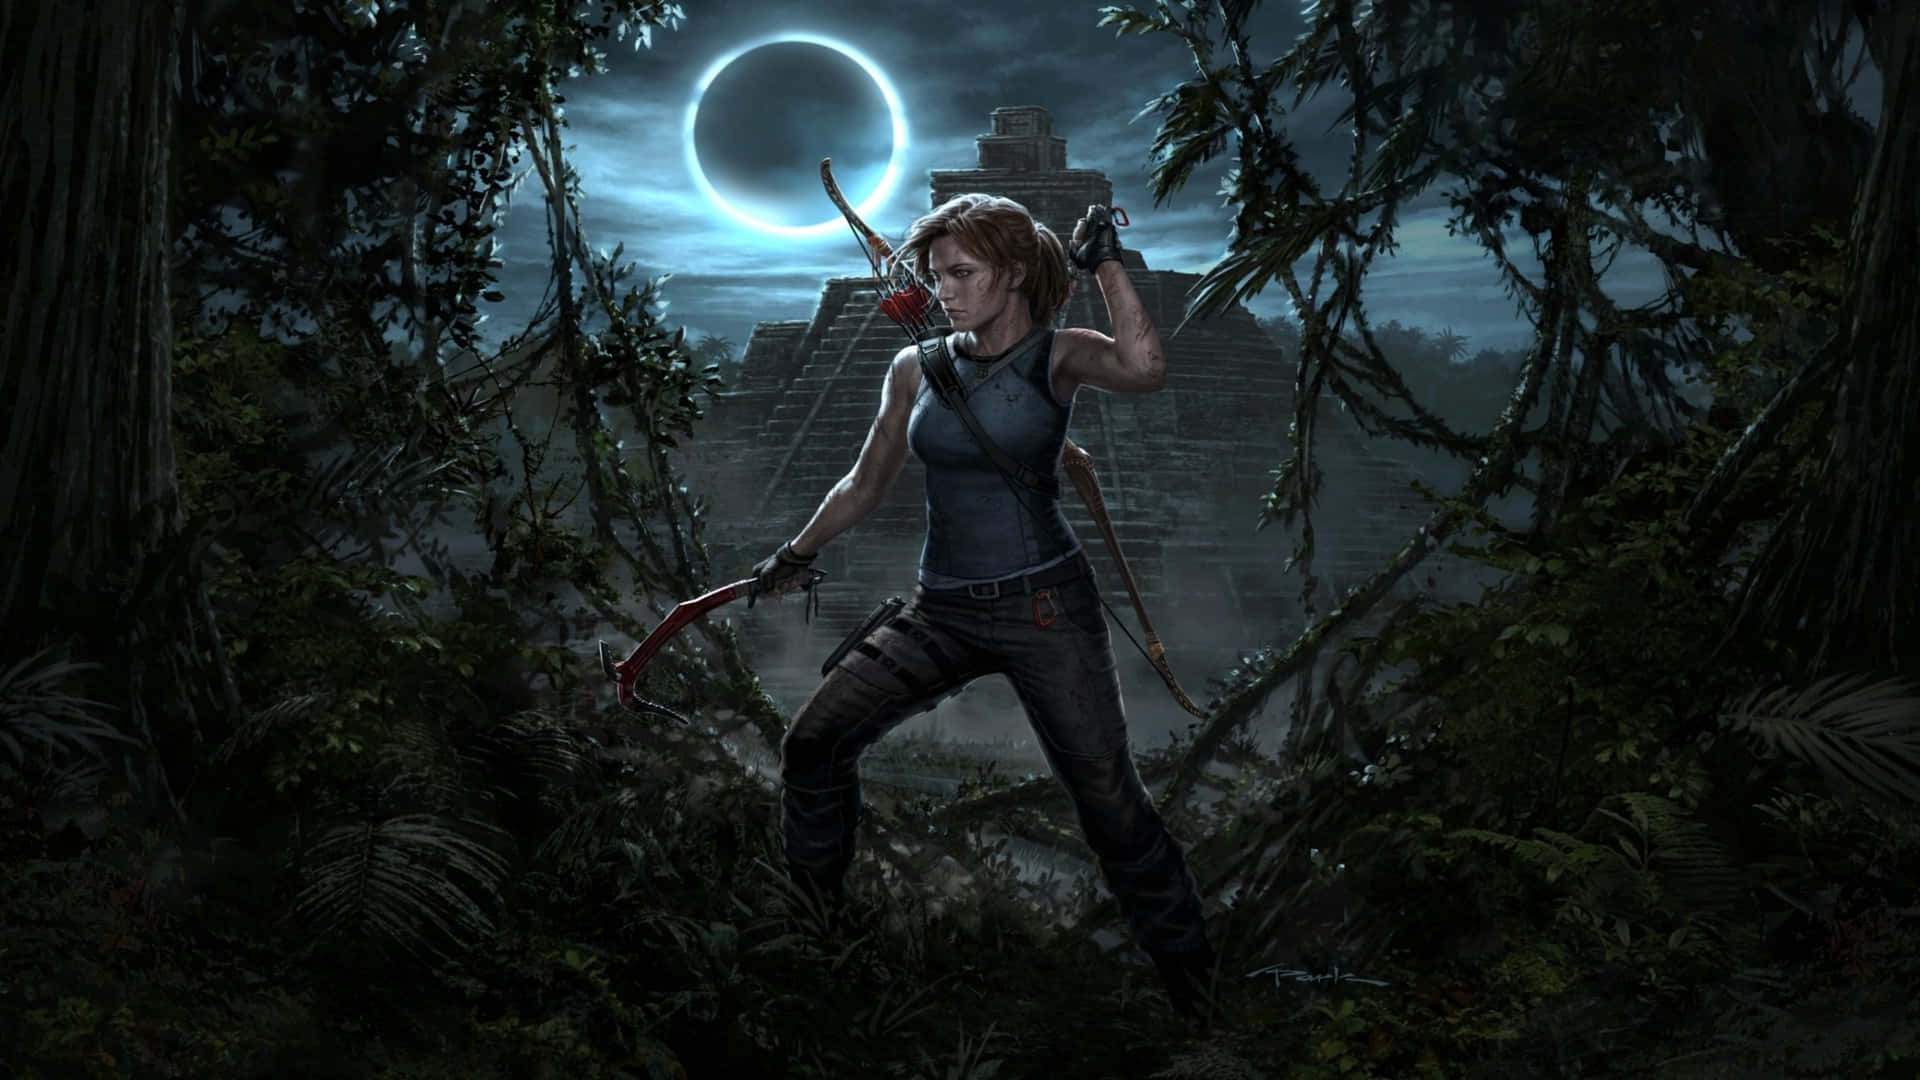 Dive into a thrilling adventure journey with Shadow of the Tomb Raider